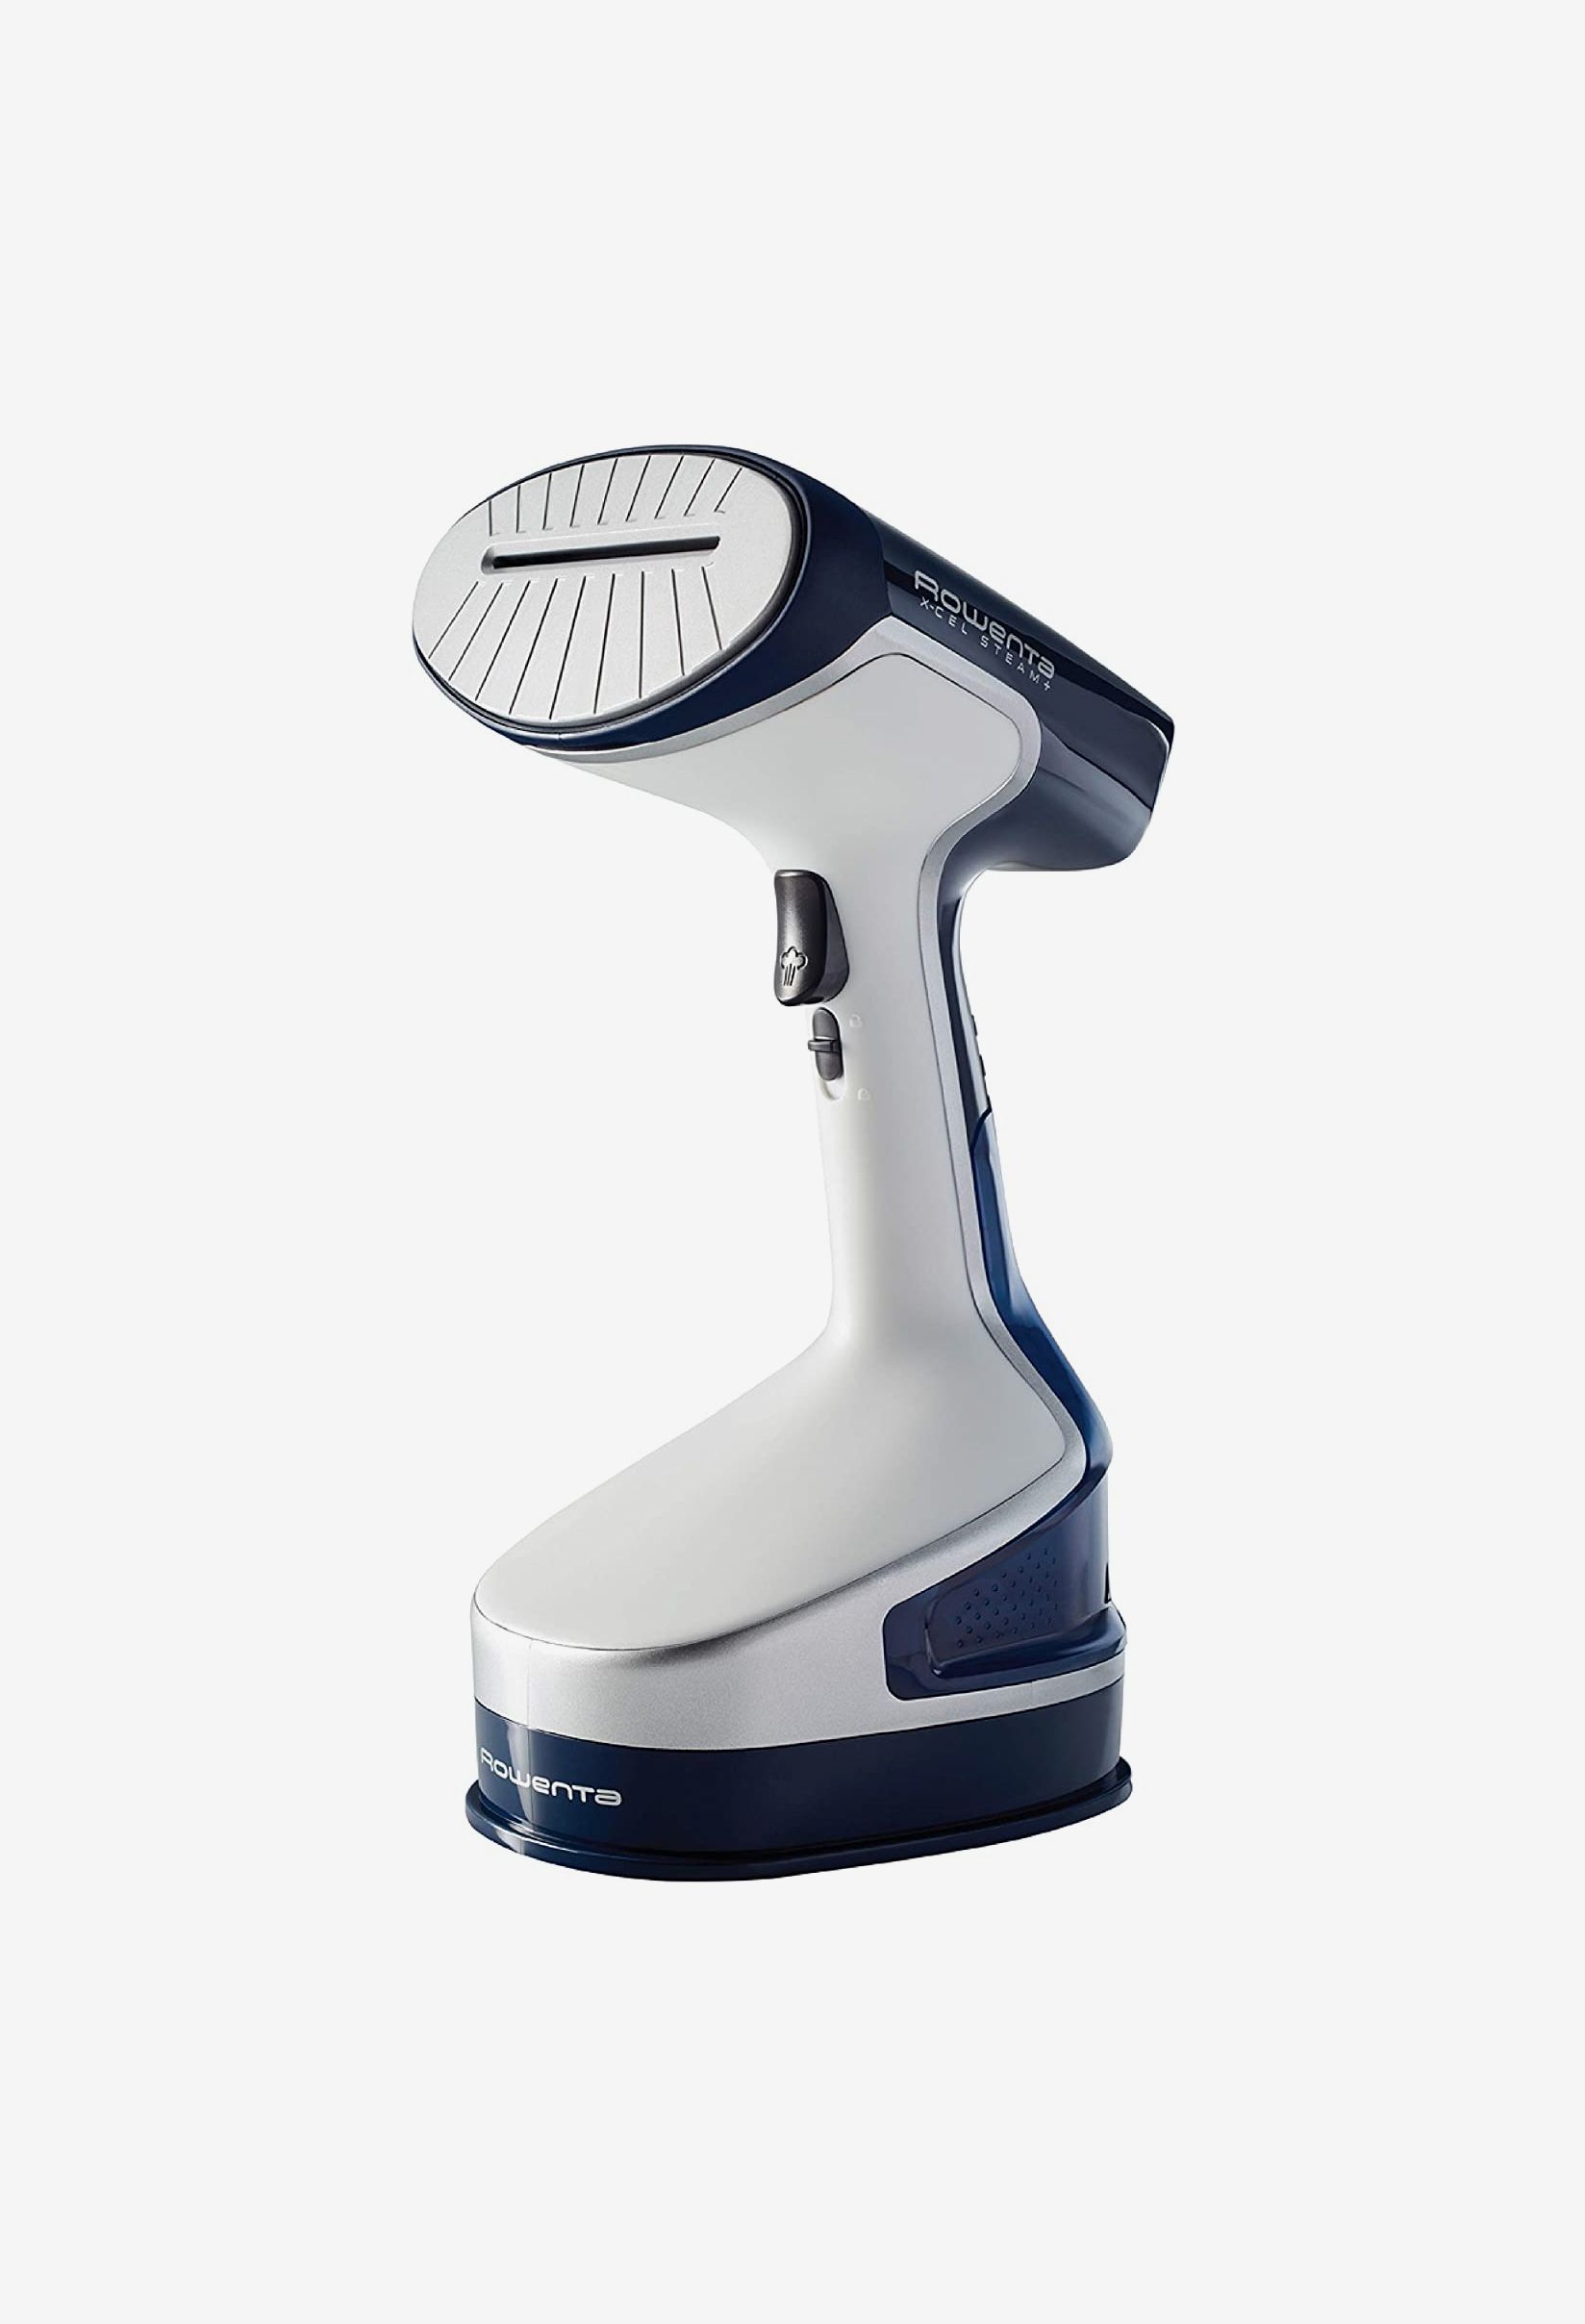 The Best Garment Steamers on the Market